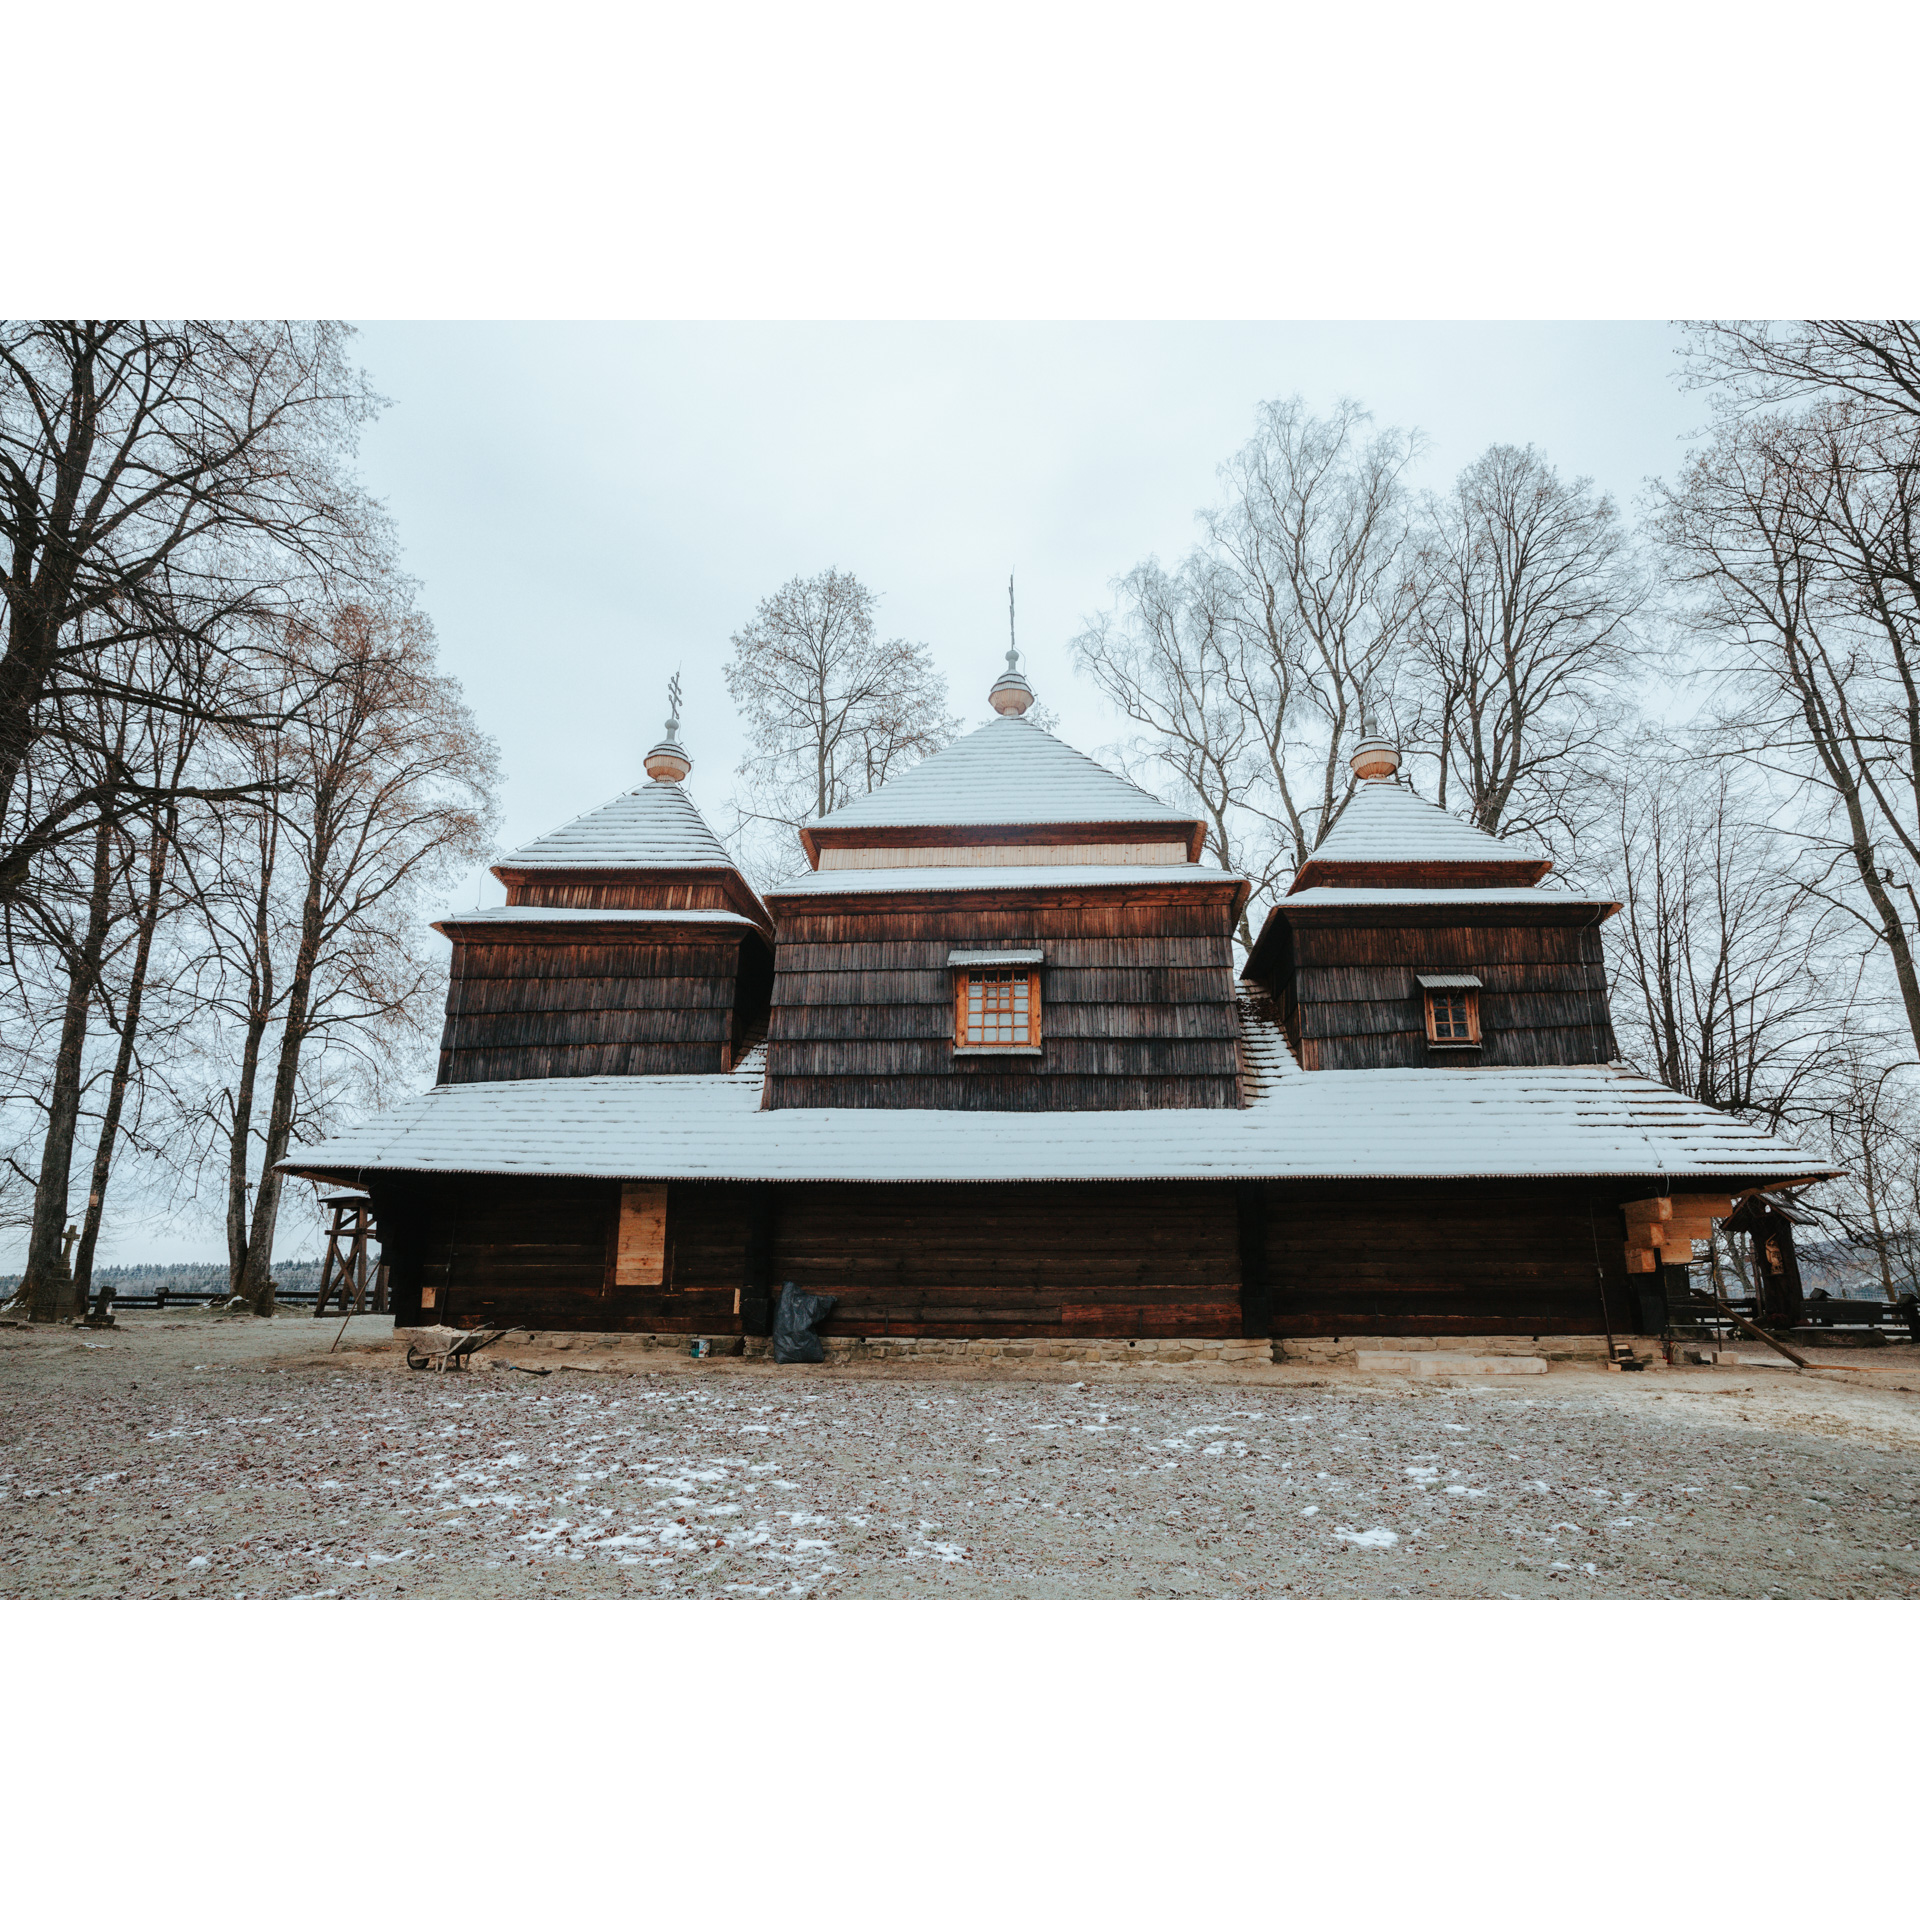 Wooden Orthodox church with a snow-covered roof and a large window among the trees